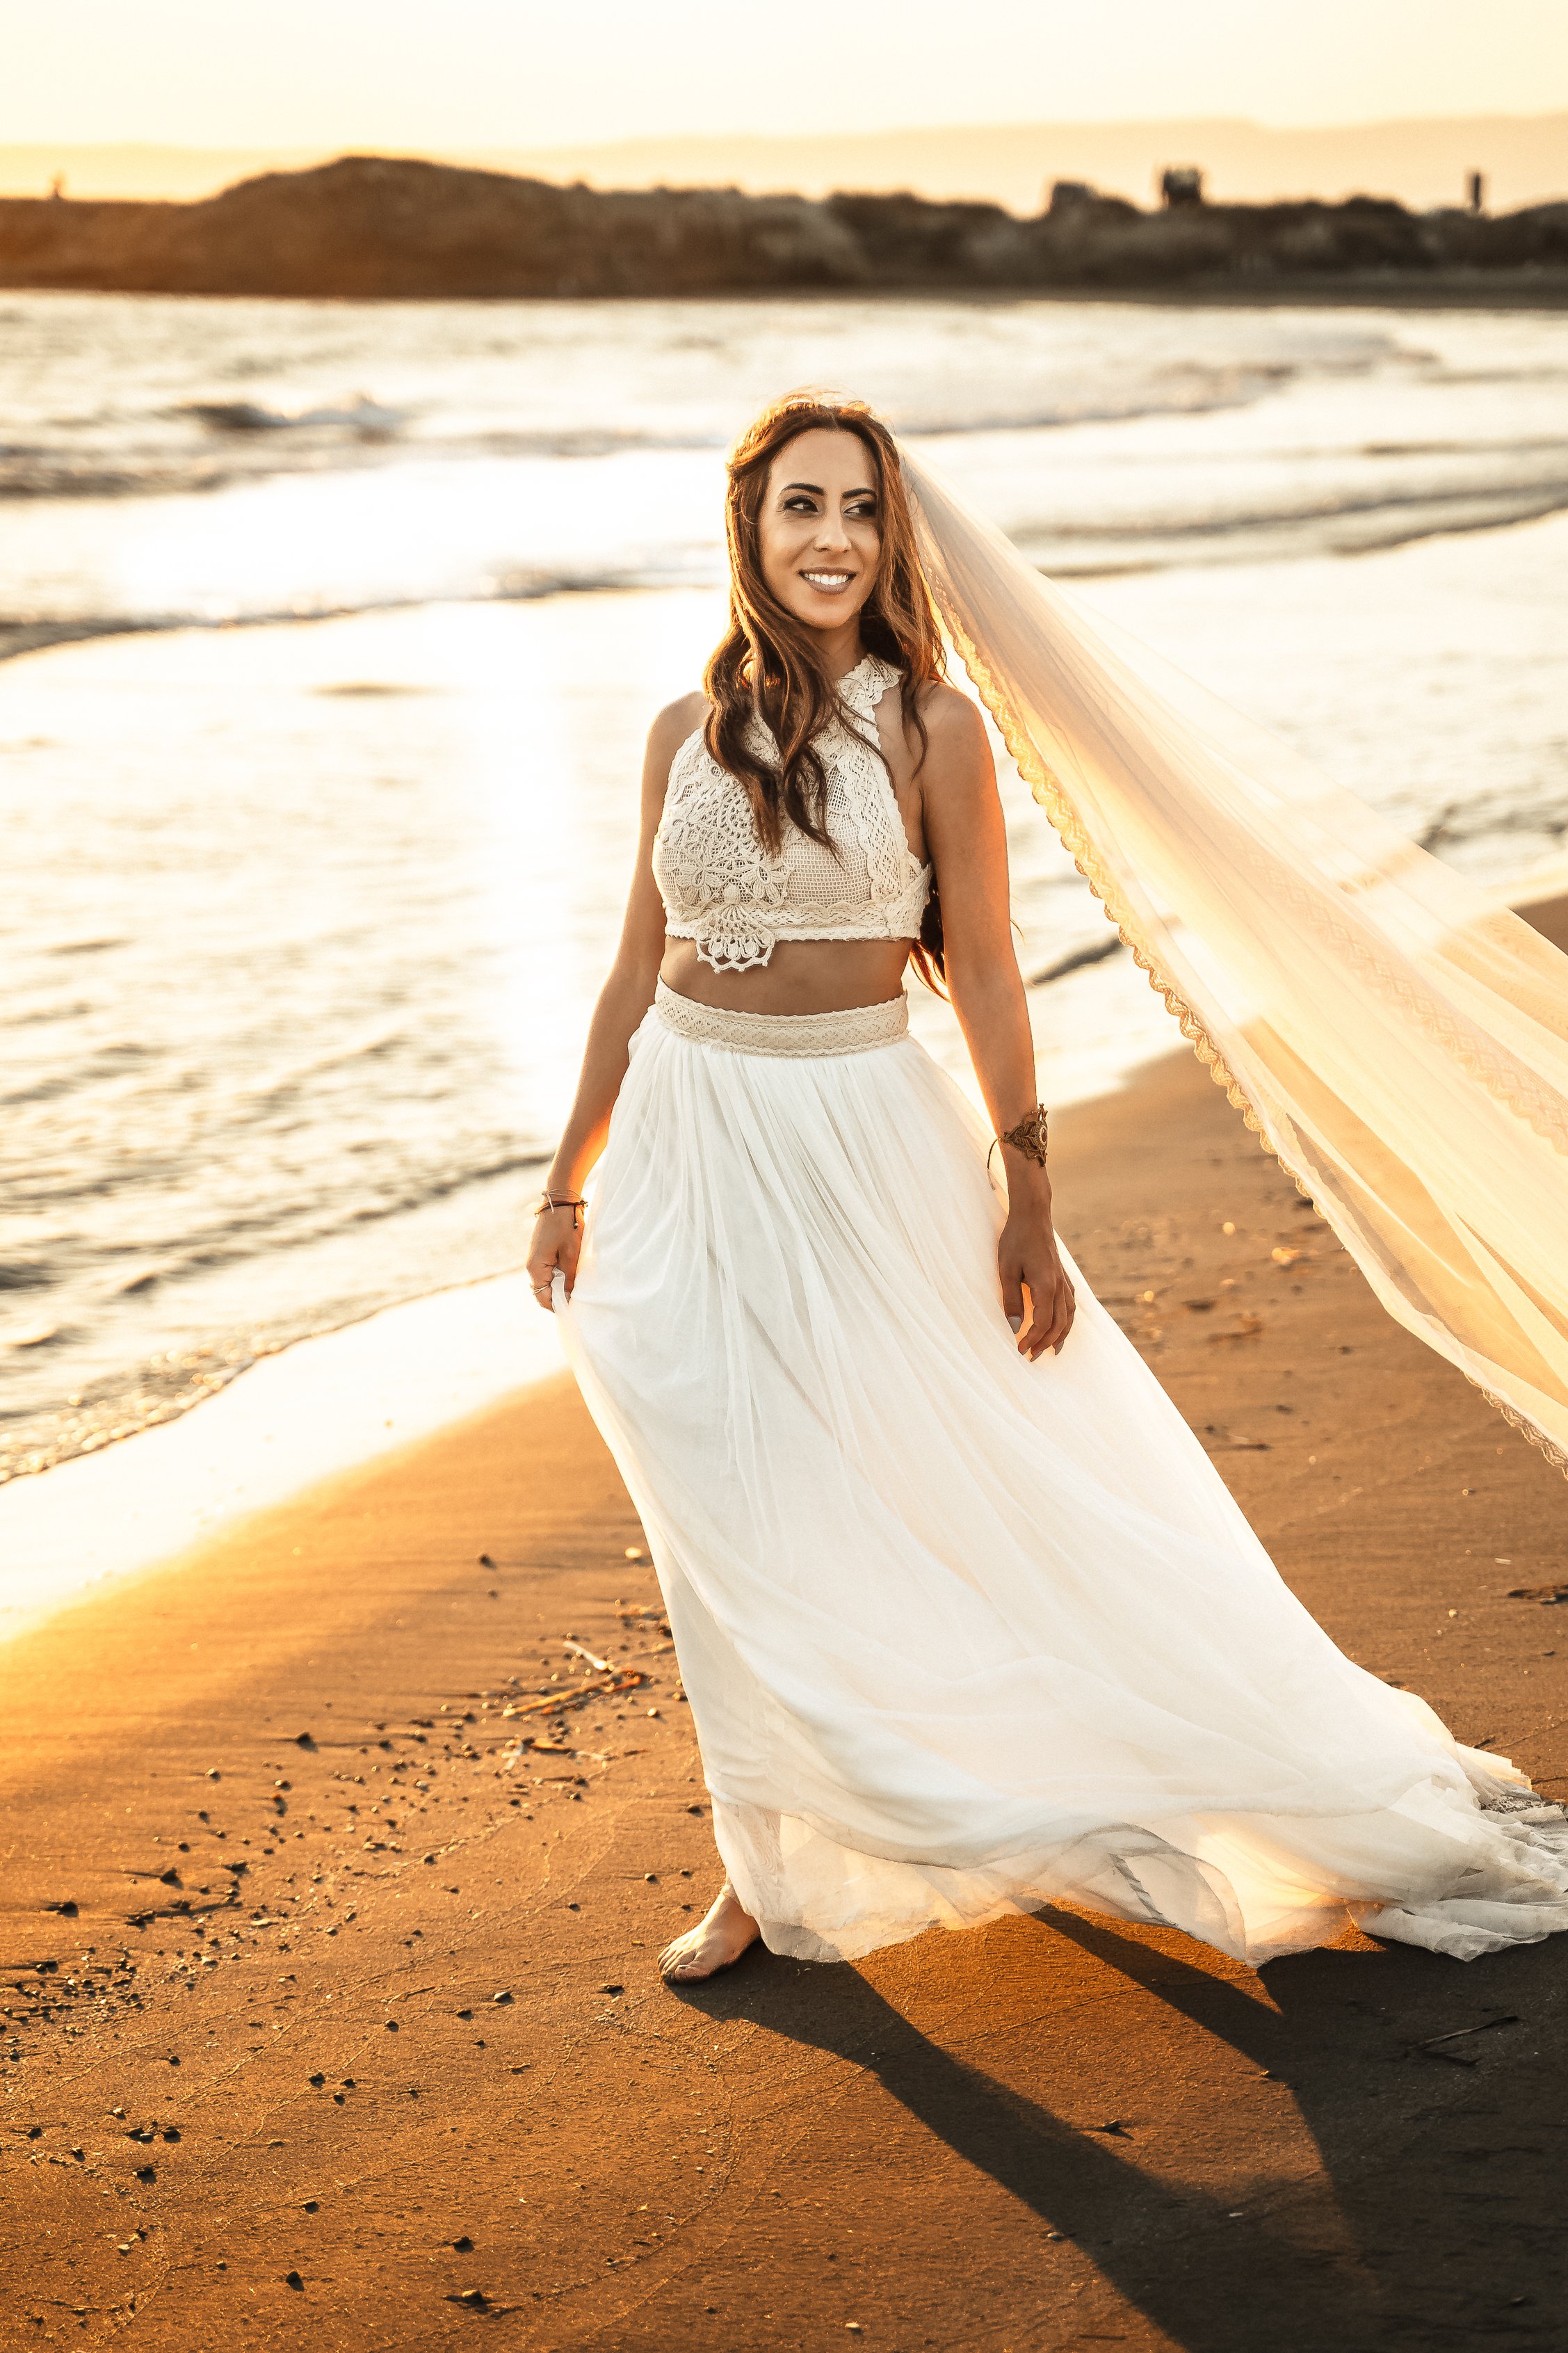 The best way to remember your special day in Cyprus is with breathtaking wedding photography